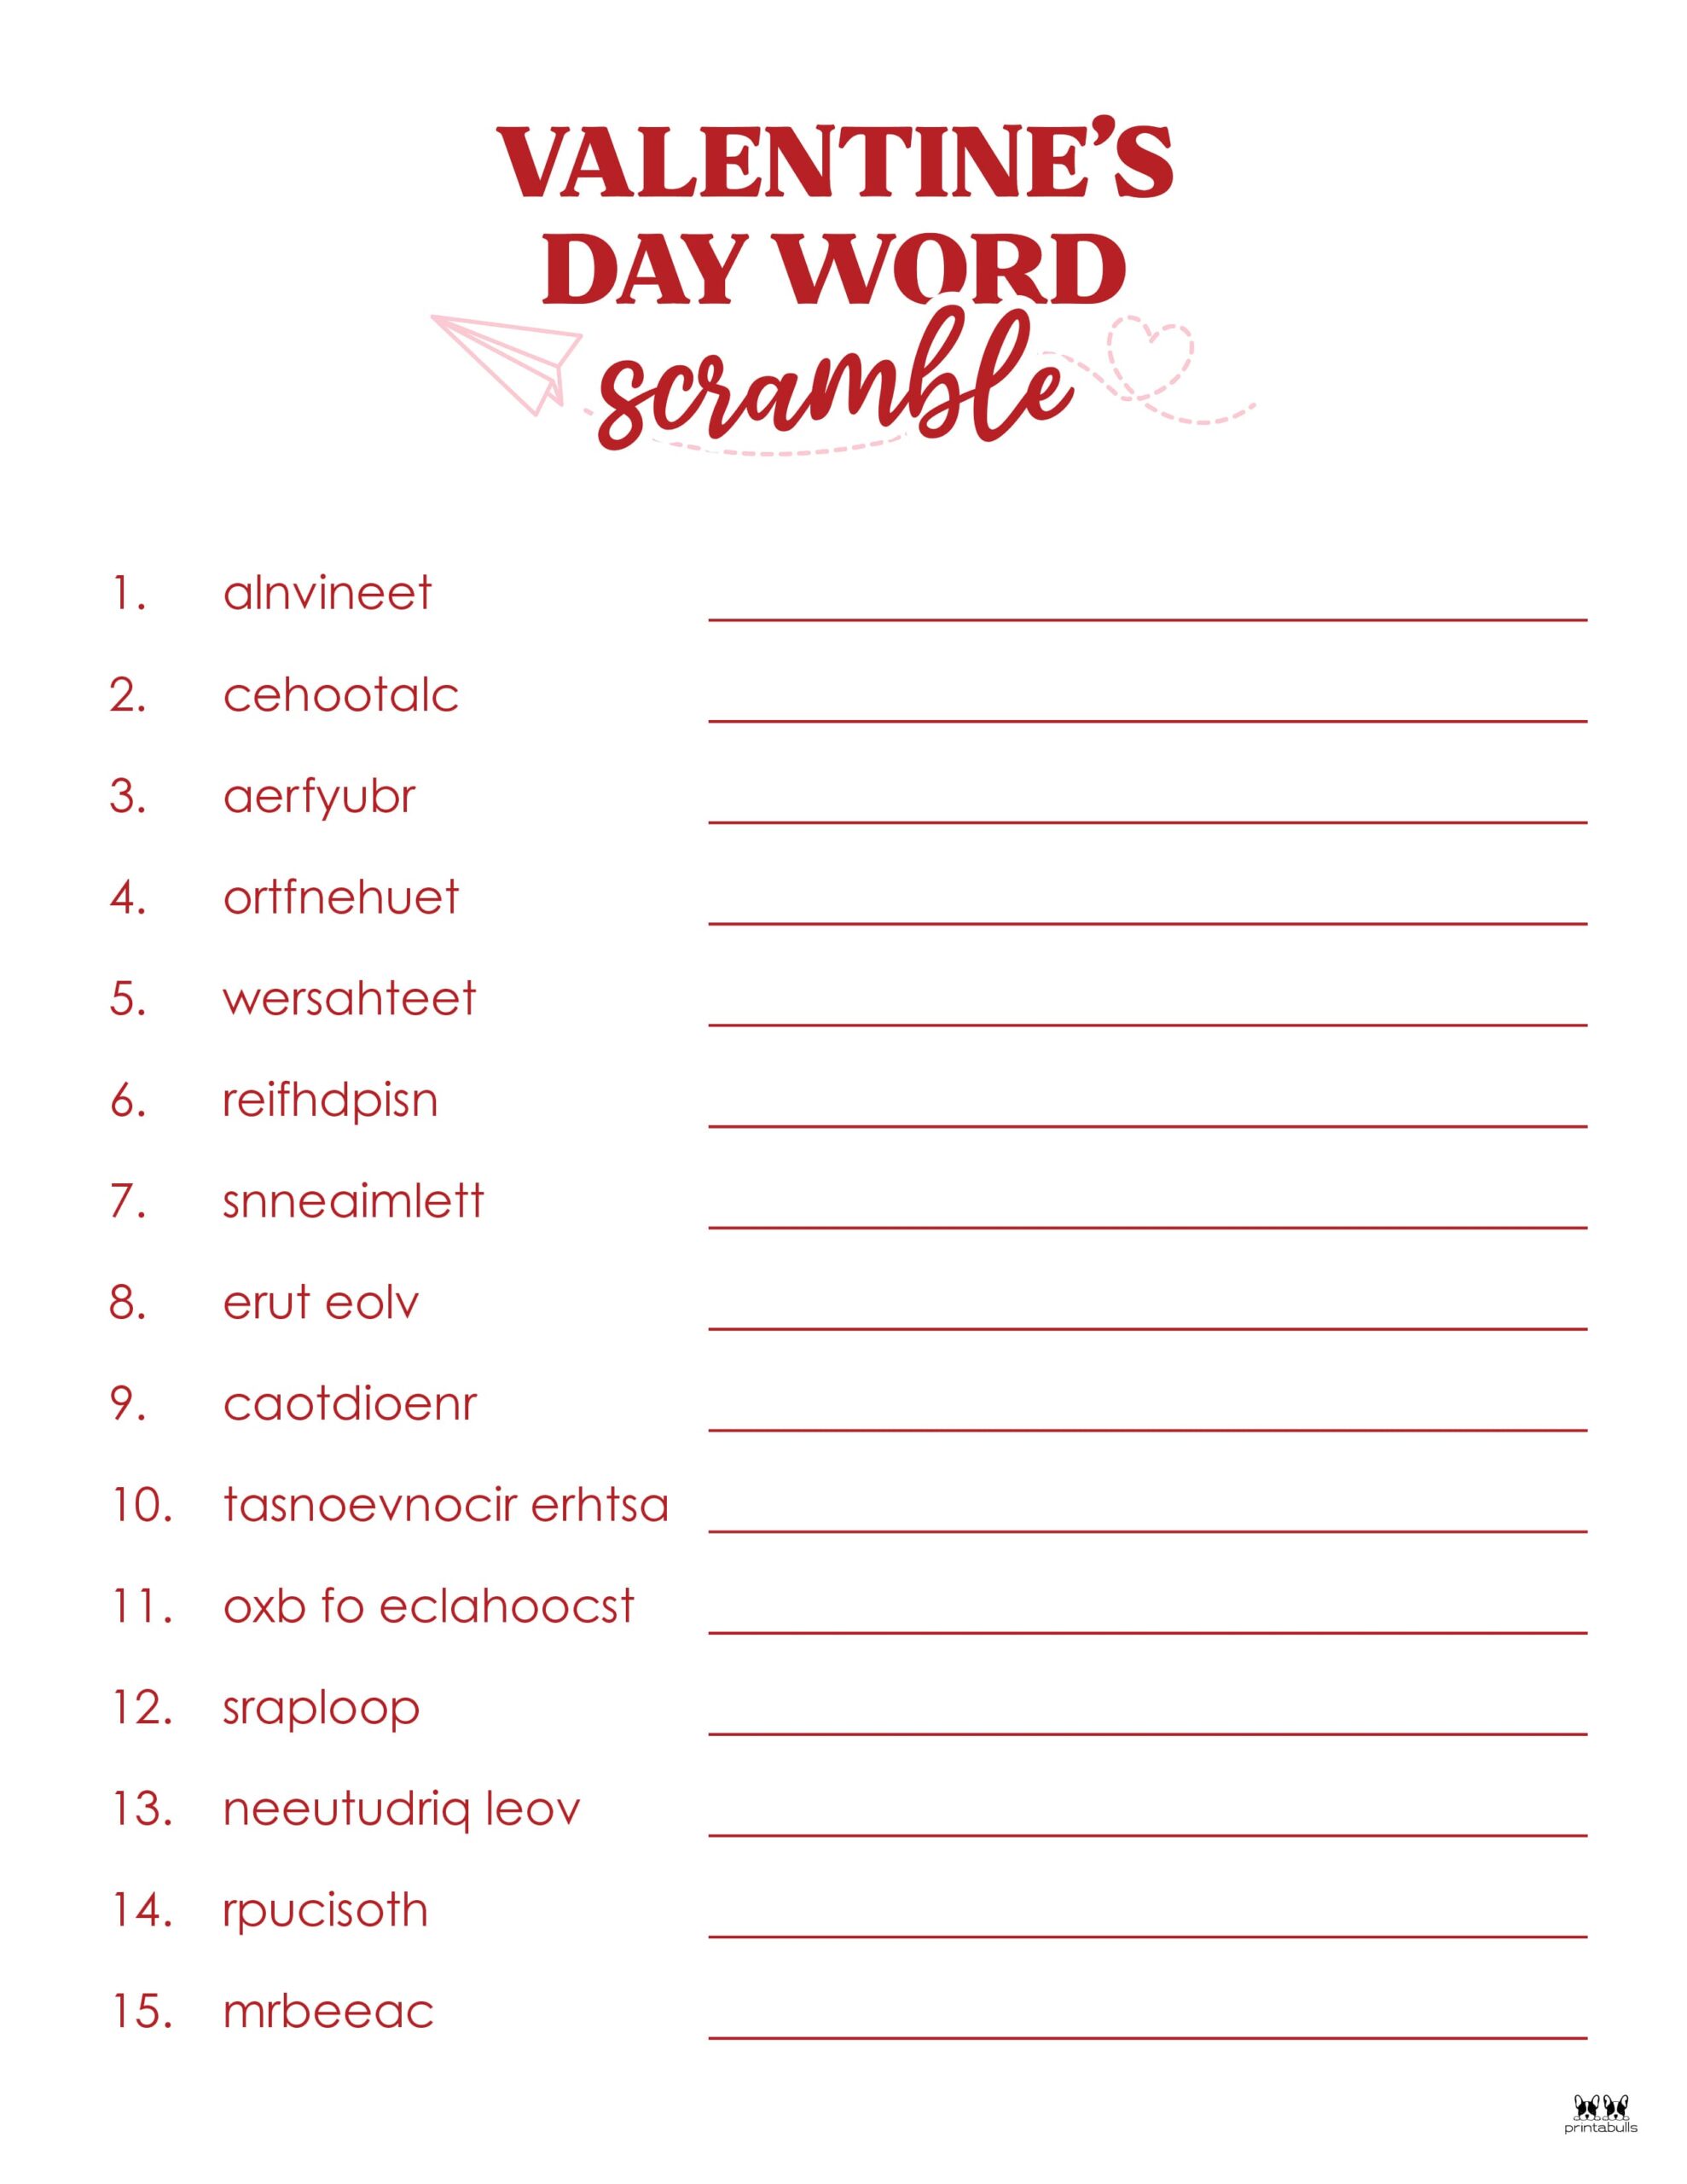 valentine-s-day-word-scrambles-10-free-pages-printabulls